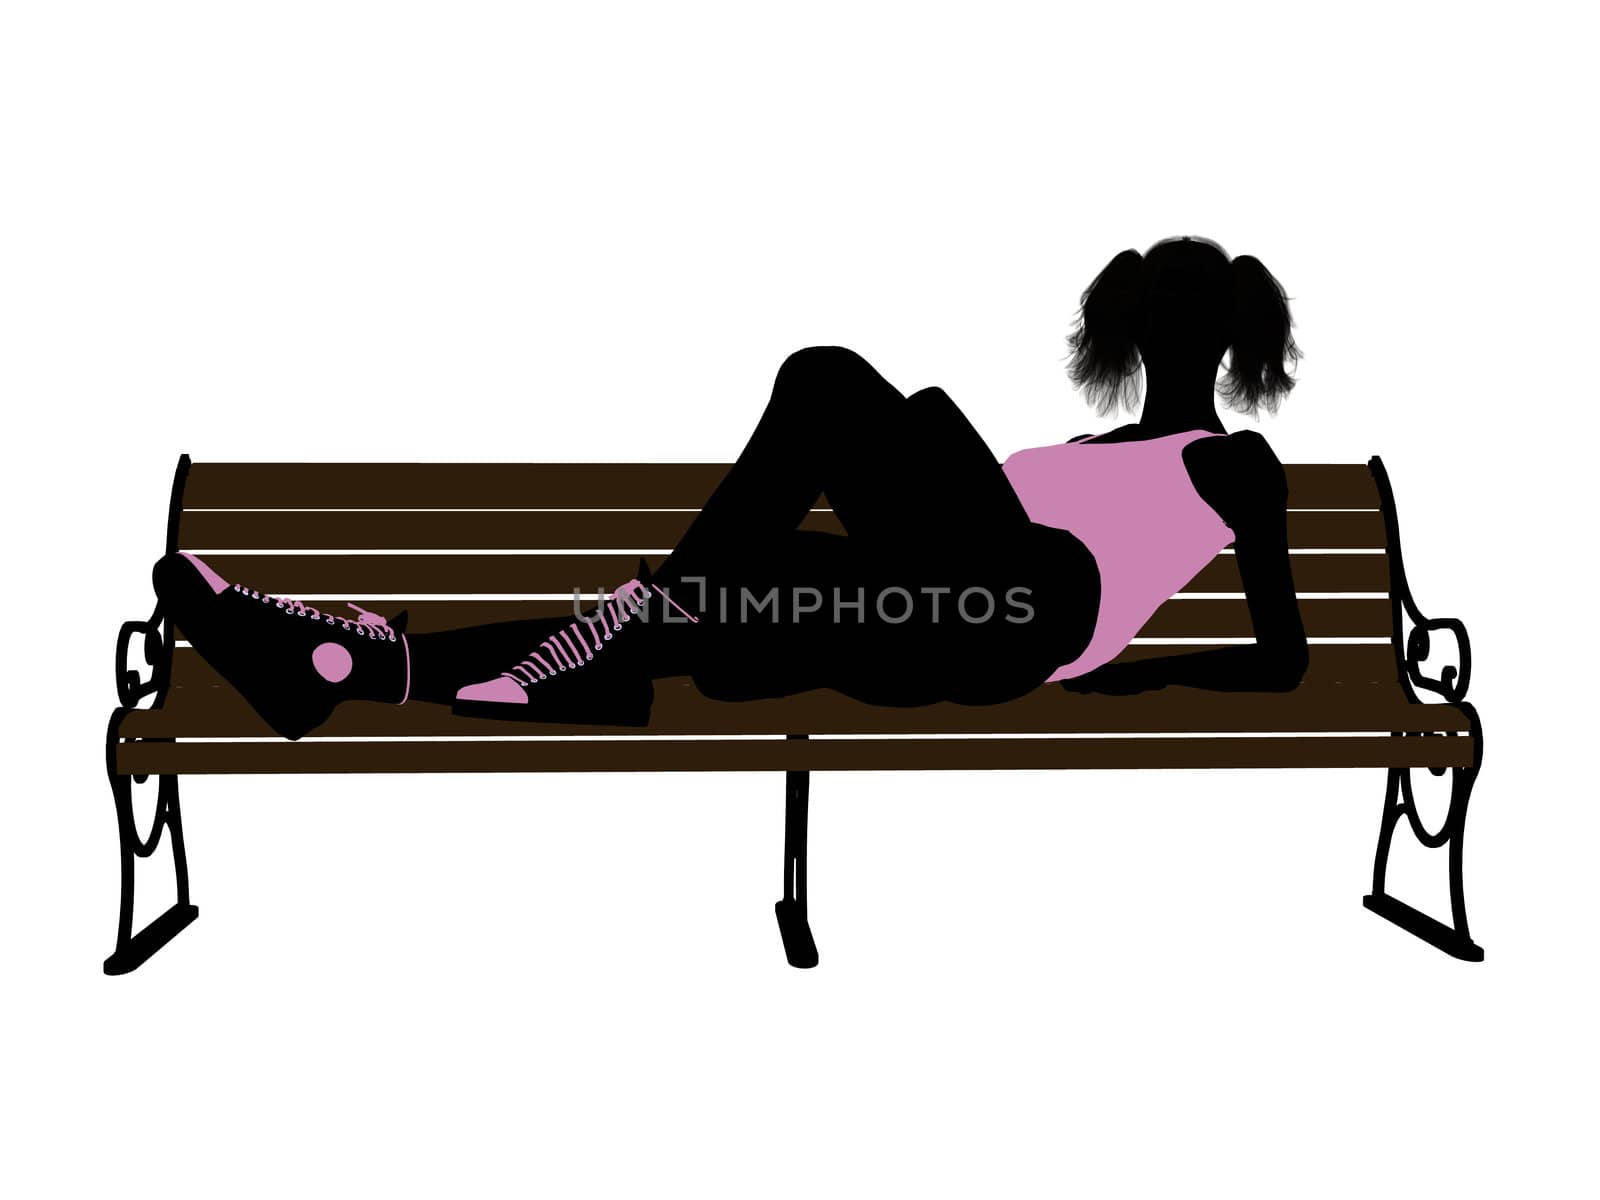 Female athlete lying on a bench silhouette on a white background